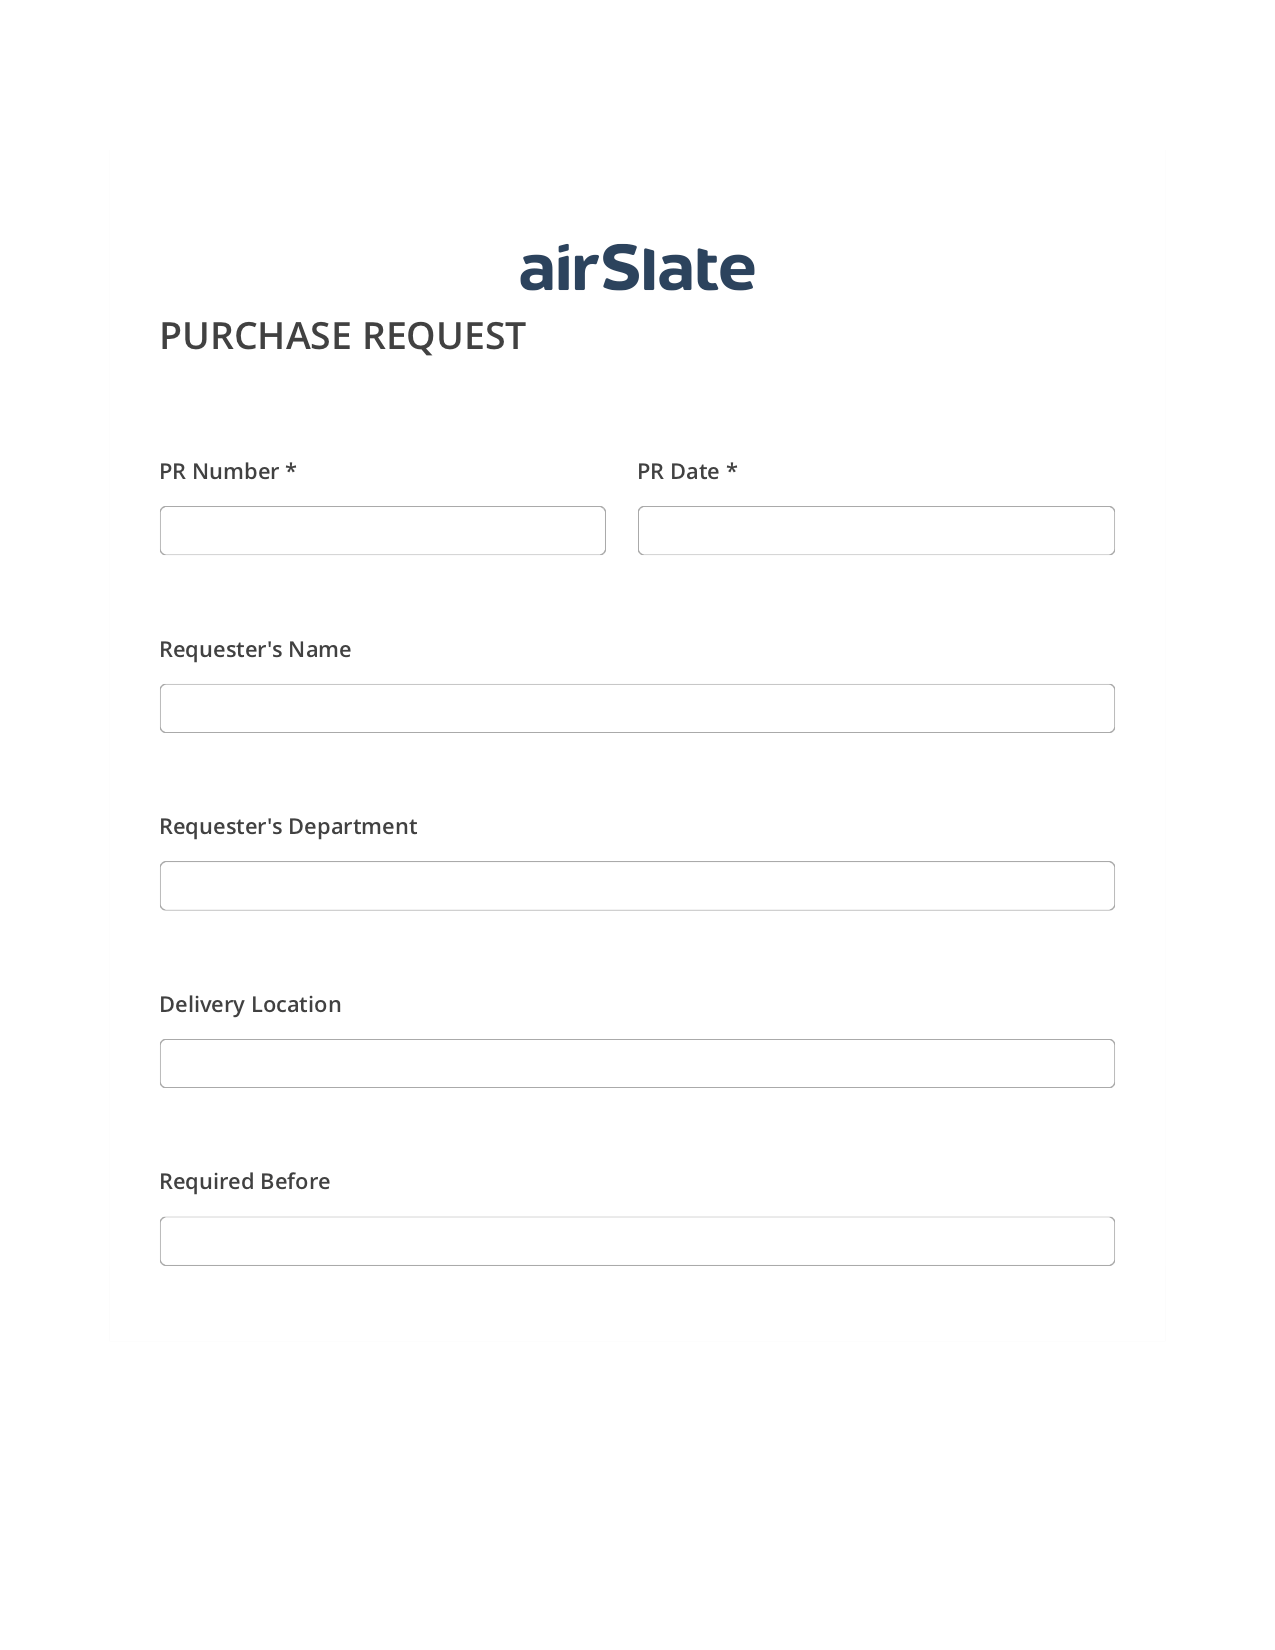 Item Purchase Request Flow OneDrive Bot